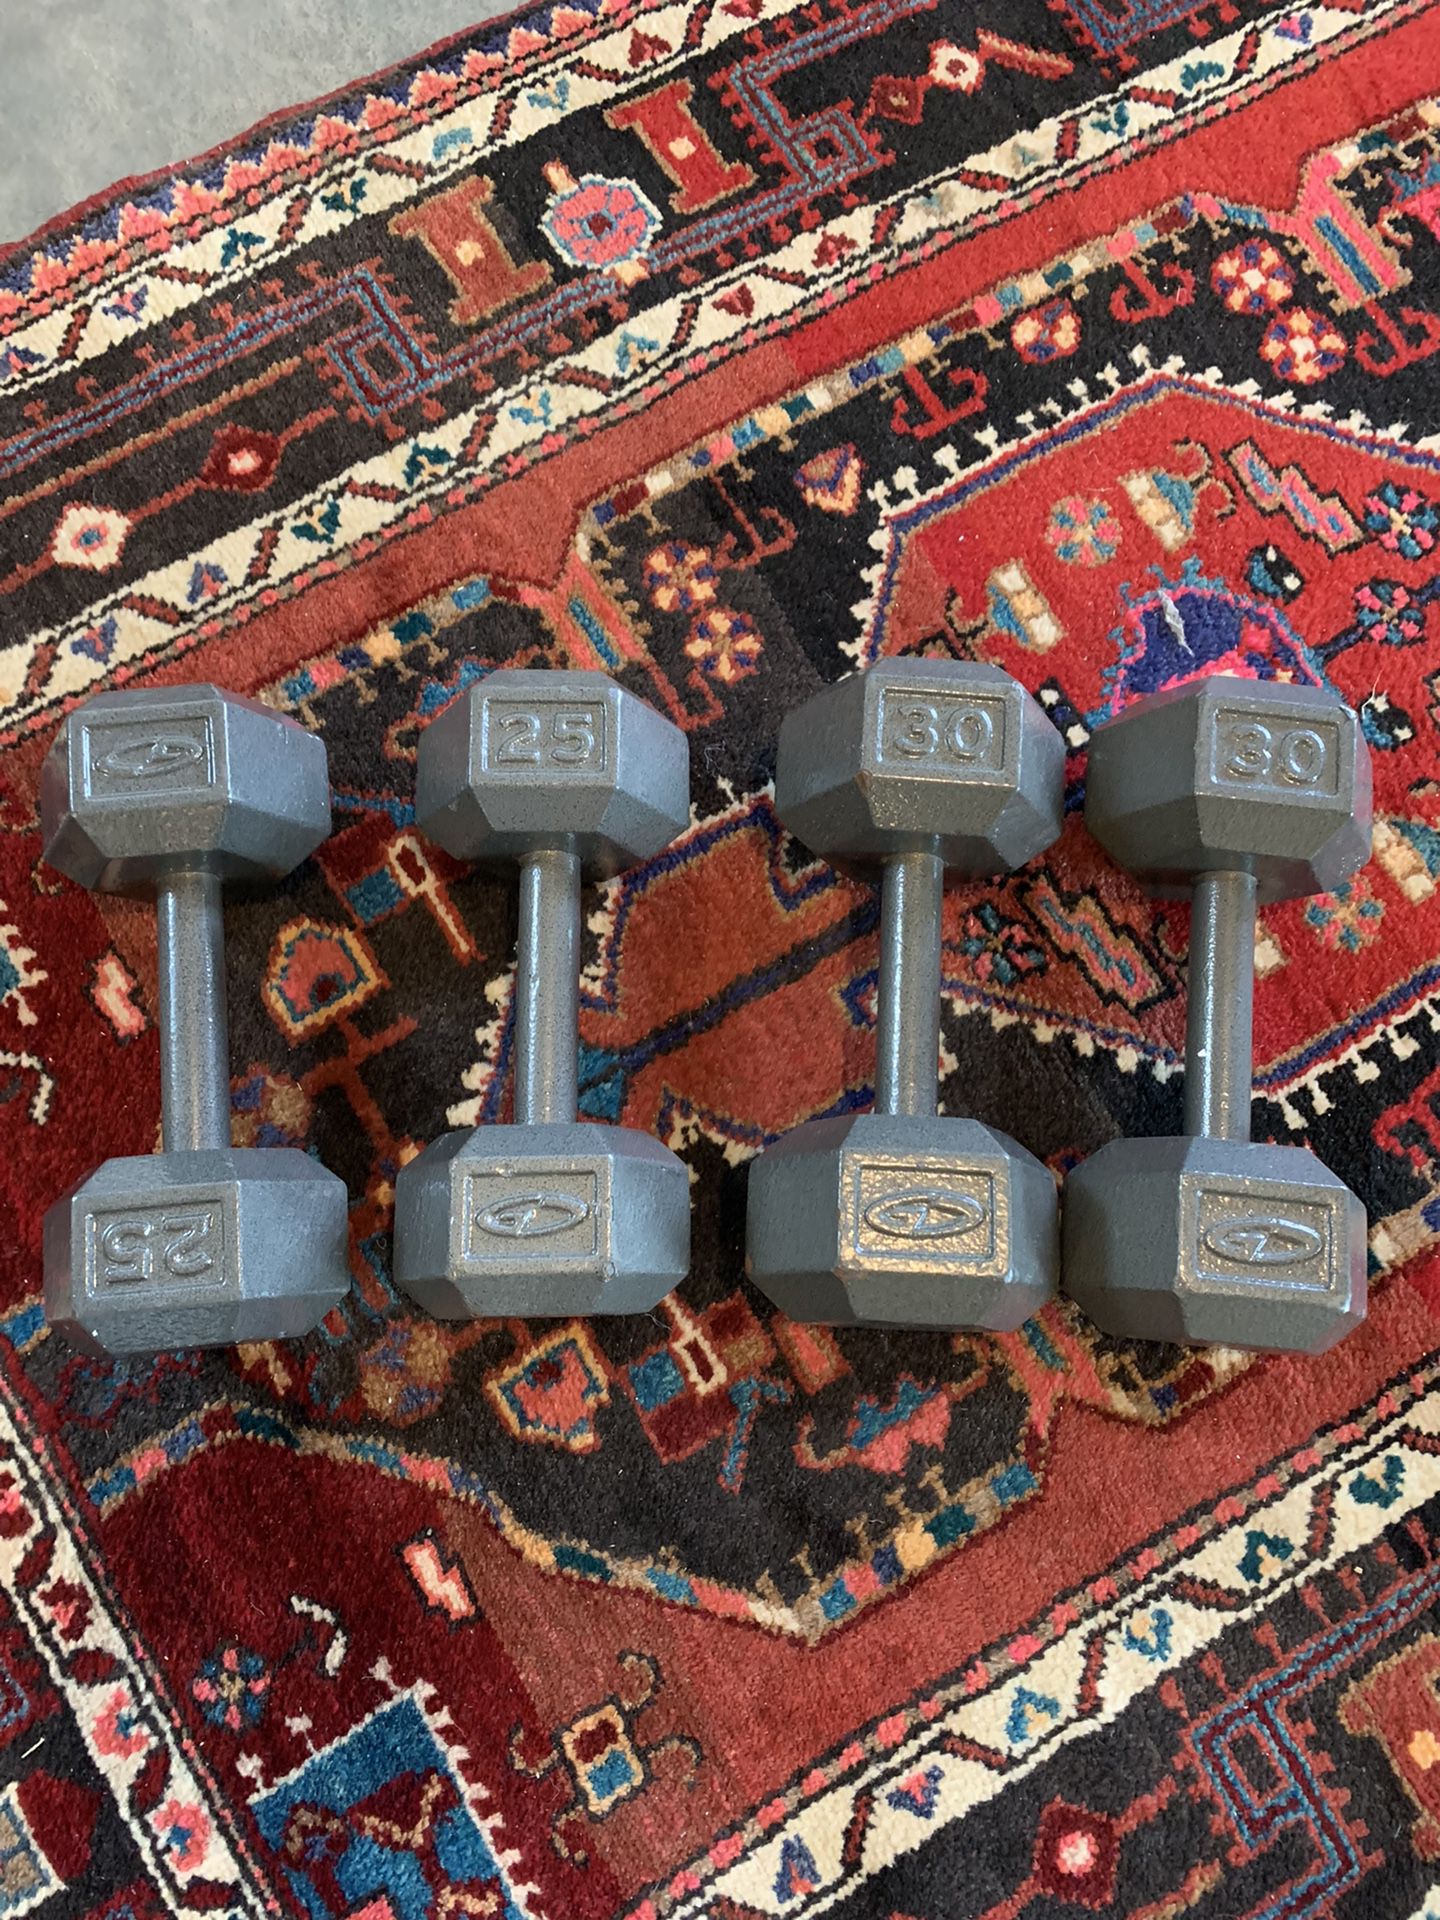 25lb($50)and 30lb($60) Dumbbell Sets  